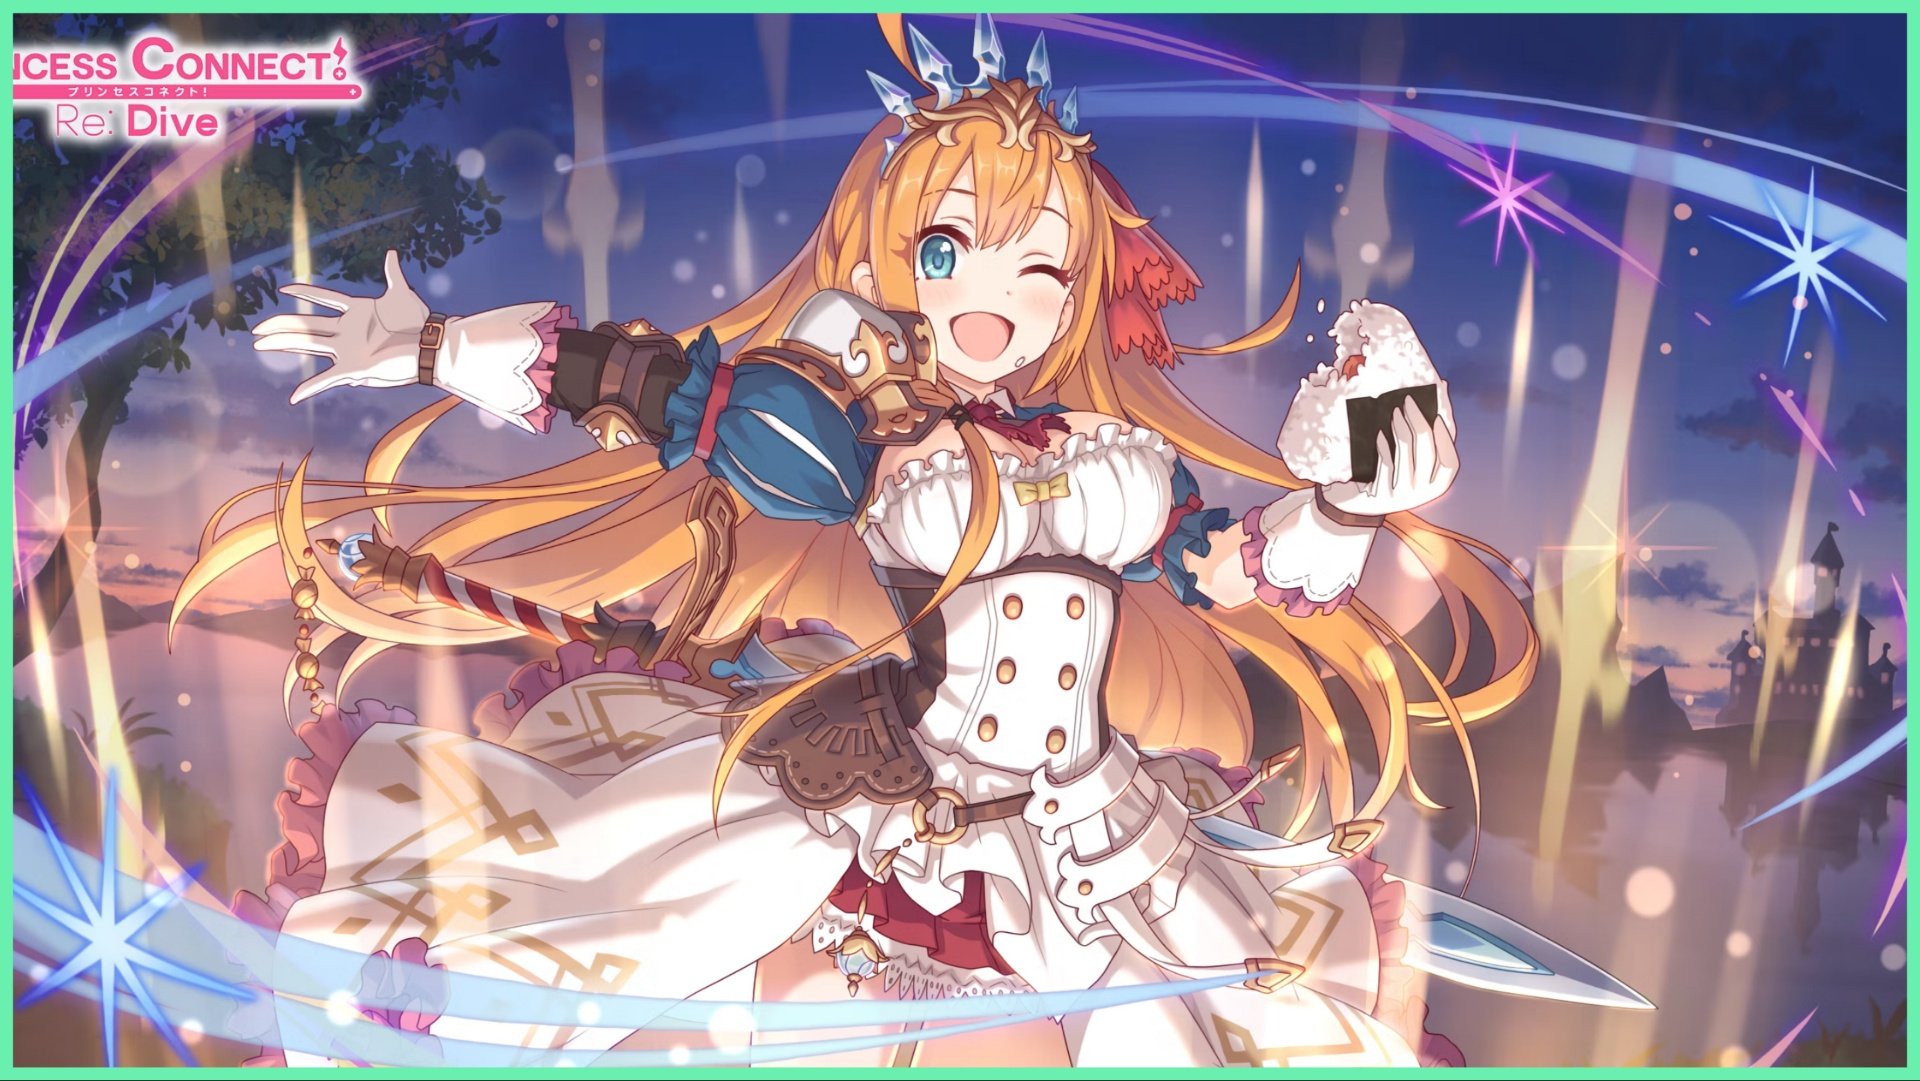 Featured image for our Princess Connect RE Dive tier list shows a ginger haired girl in a maid-esque outfit with a rice ball with auras flowing around her as she smiles